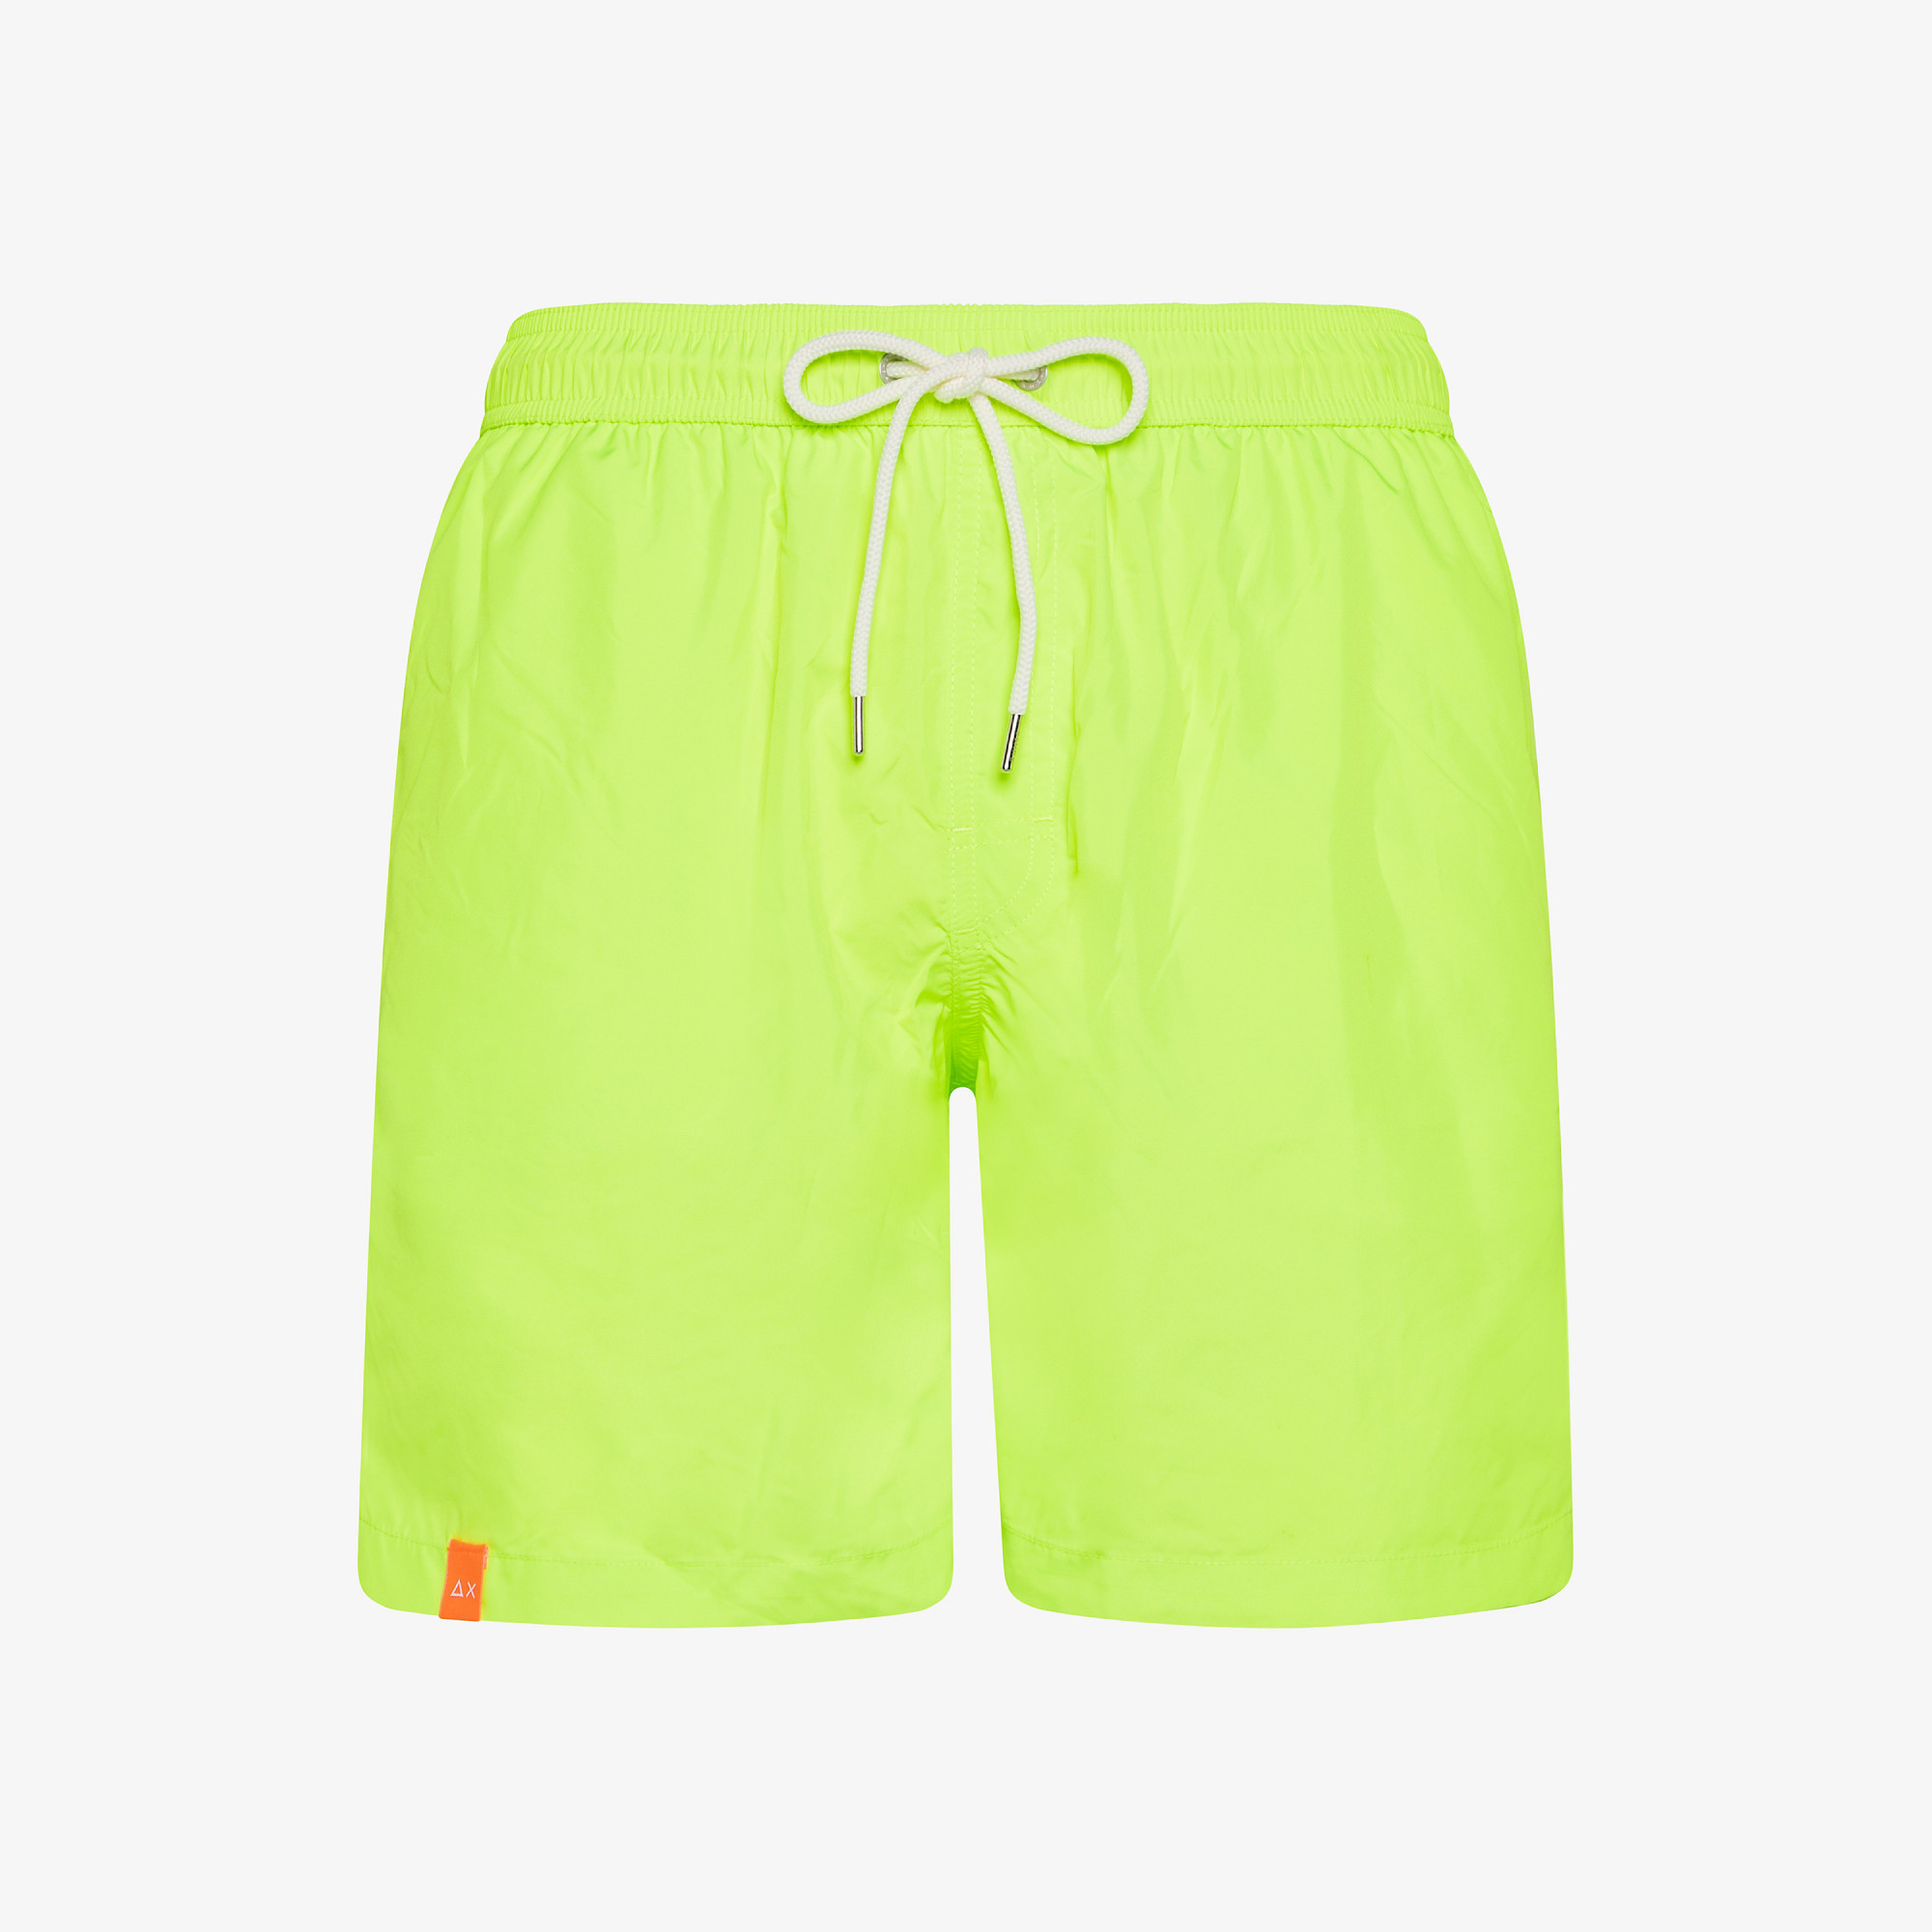 SWIM PANT PACKABLE YELLOW FLUO